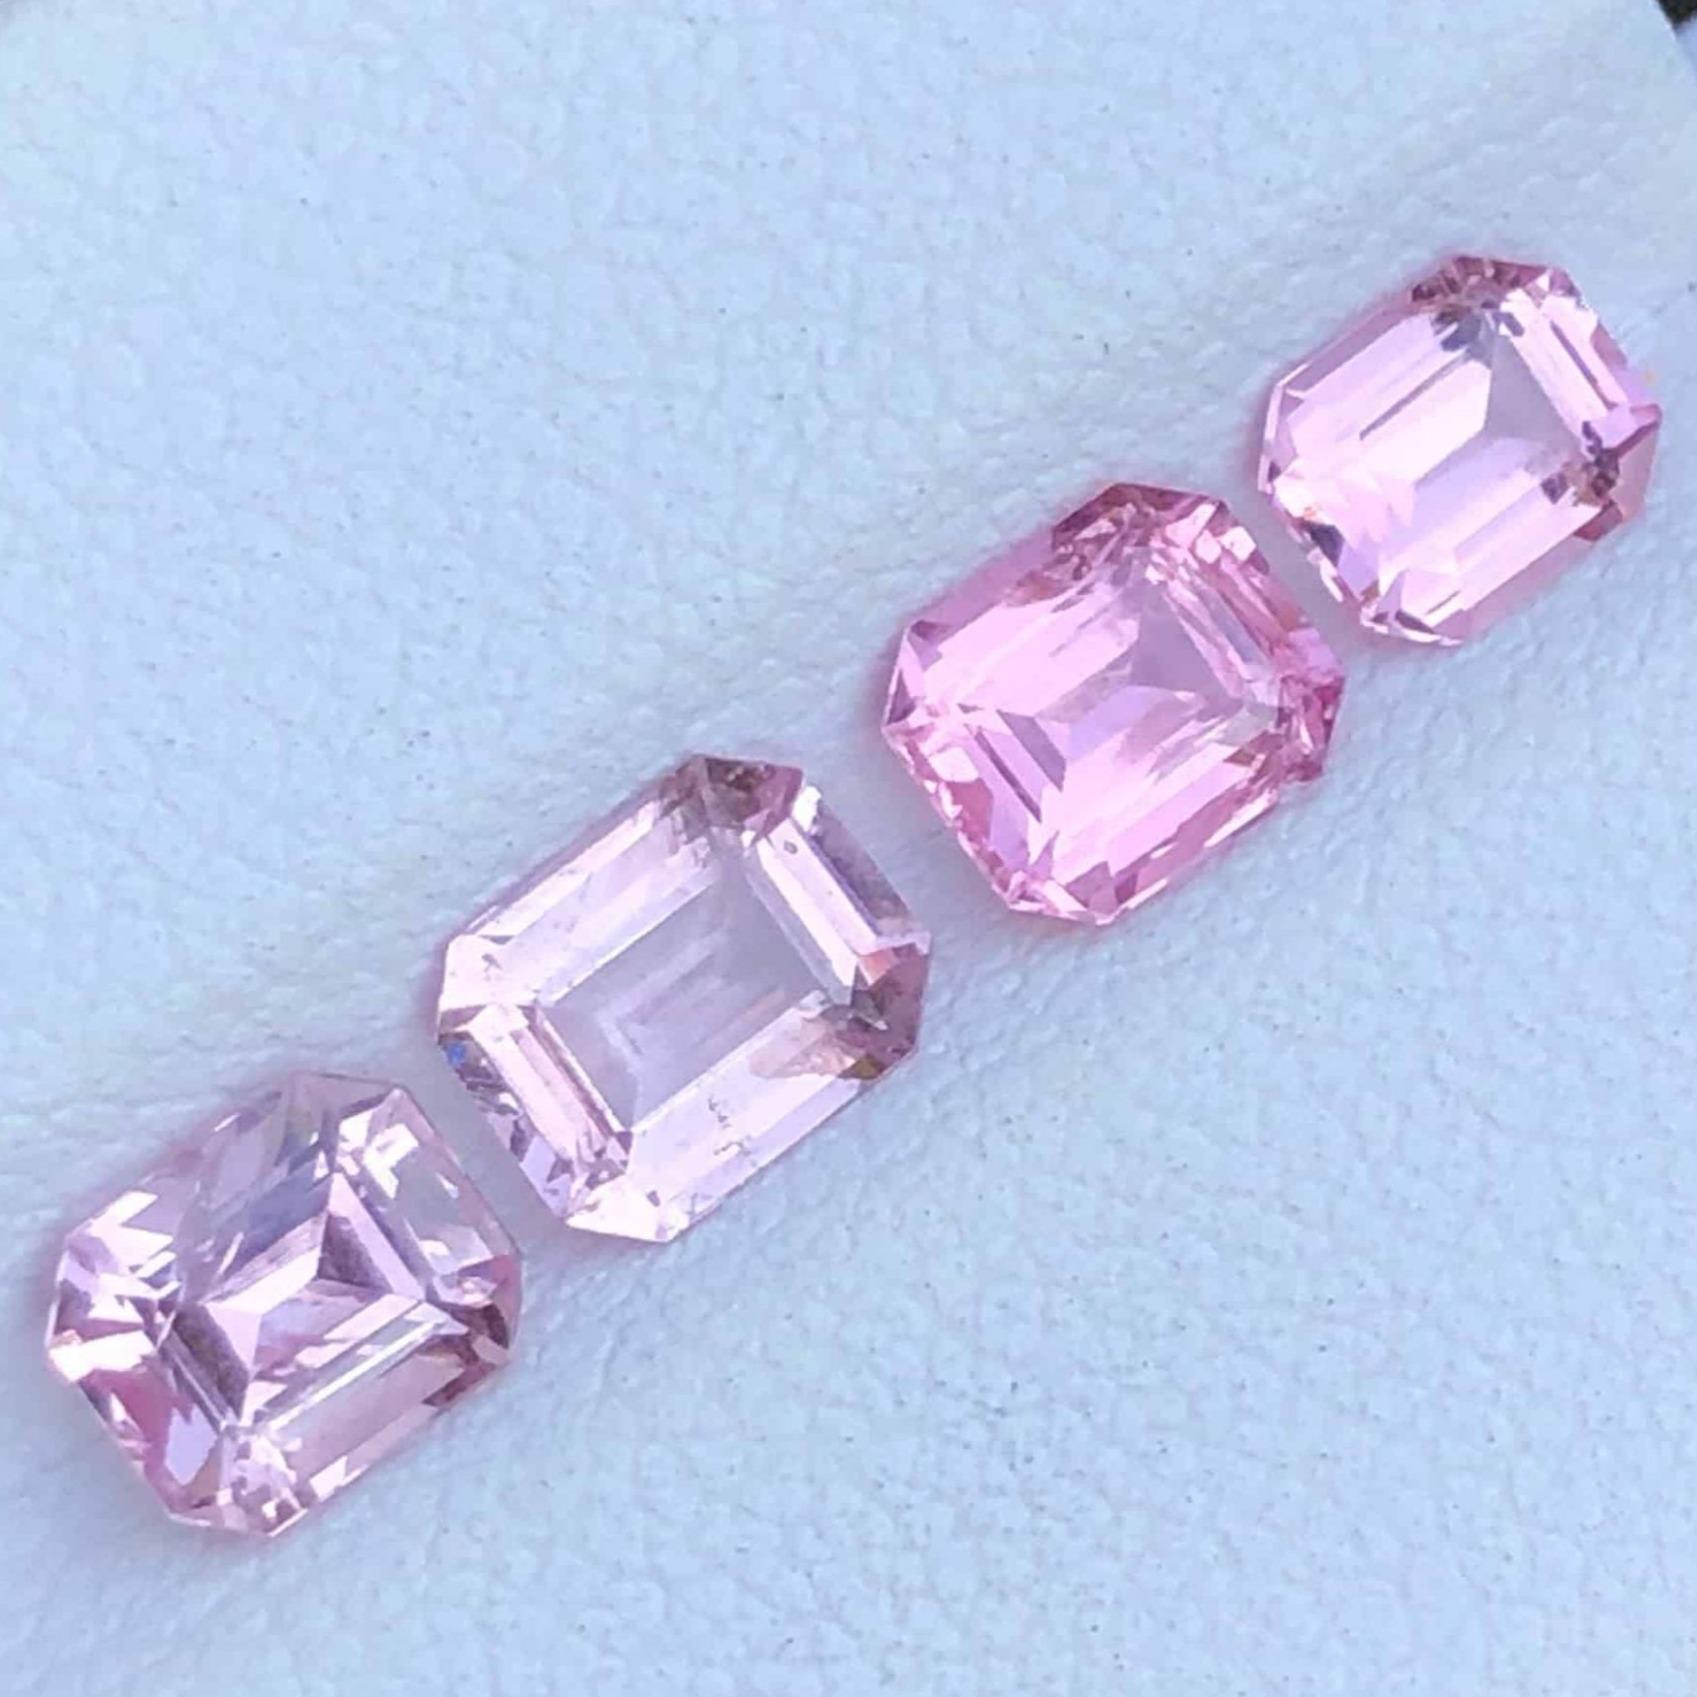 Gemstone Type Natural Pink Spinel Jewelry Set
Weight 3.05 carats
Shape Emerald Cut
Clarity Slightly Included (SI)
Origin Tajikistan
Treatment None





Indulge in the allure of luxury with this breathtaking 3.05-carat natural Pink Spinel, a gem of